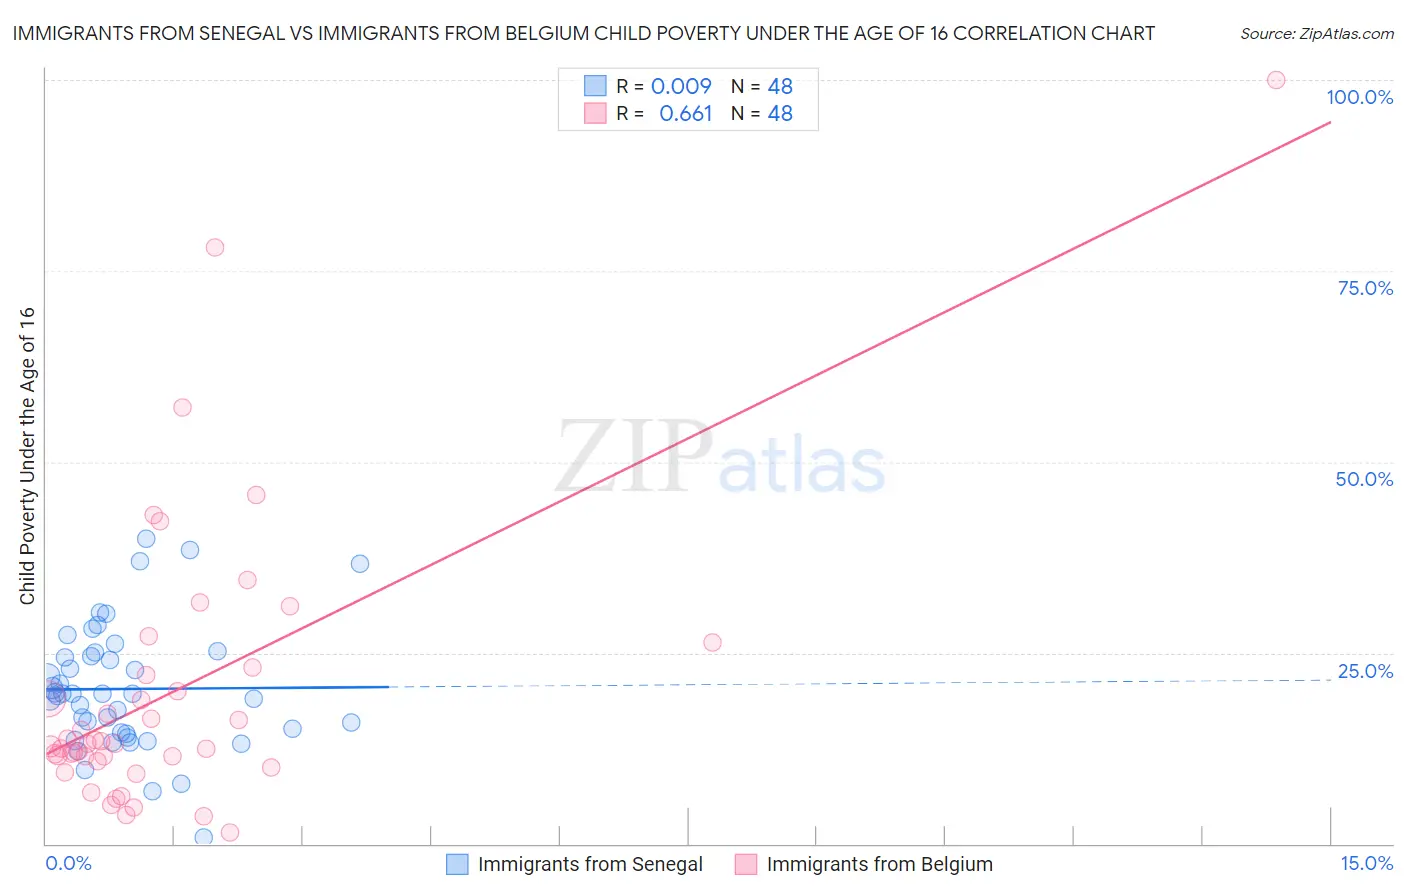 Immigrants from Senegal vs Immigrants from Belgium Child Poverty Under the Age of 16